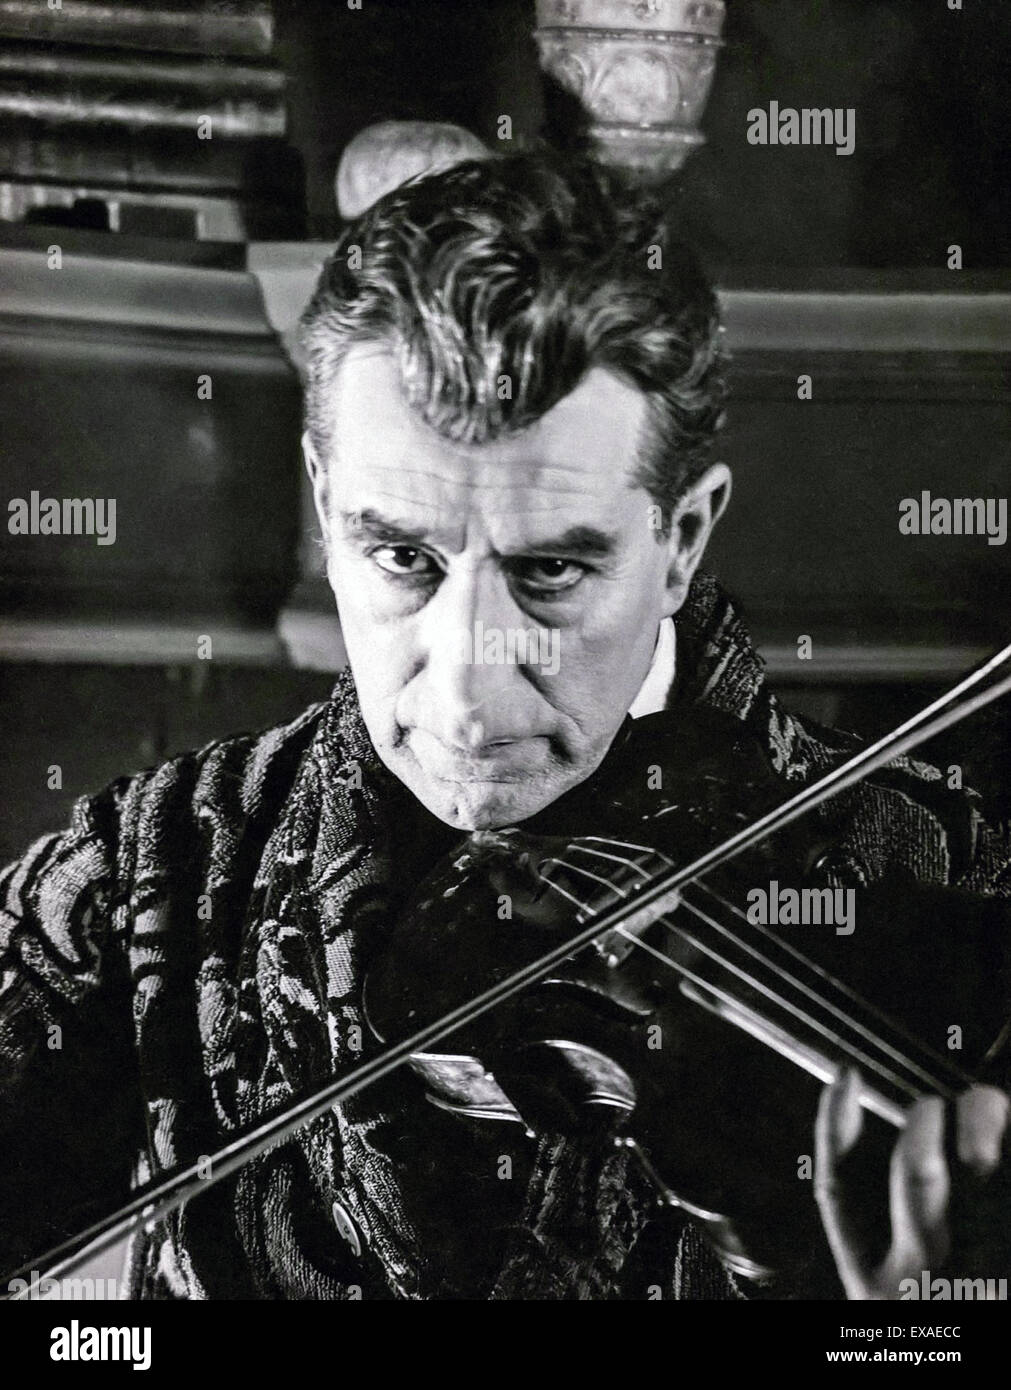 Sherlock Holmes playing the violin; from British silent movie 'The Sign of Four' starring Eille Norwood (1861-1948) as Sherlock Holmes, released in 1923. The last film in which Eille Norwood played Sherlock; Sir Arthur Conan Doyle was an admirer of Norwood's portrayal and for many he was the definitive on screen Holmes. Stock Photo